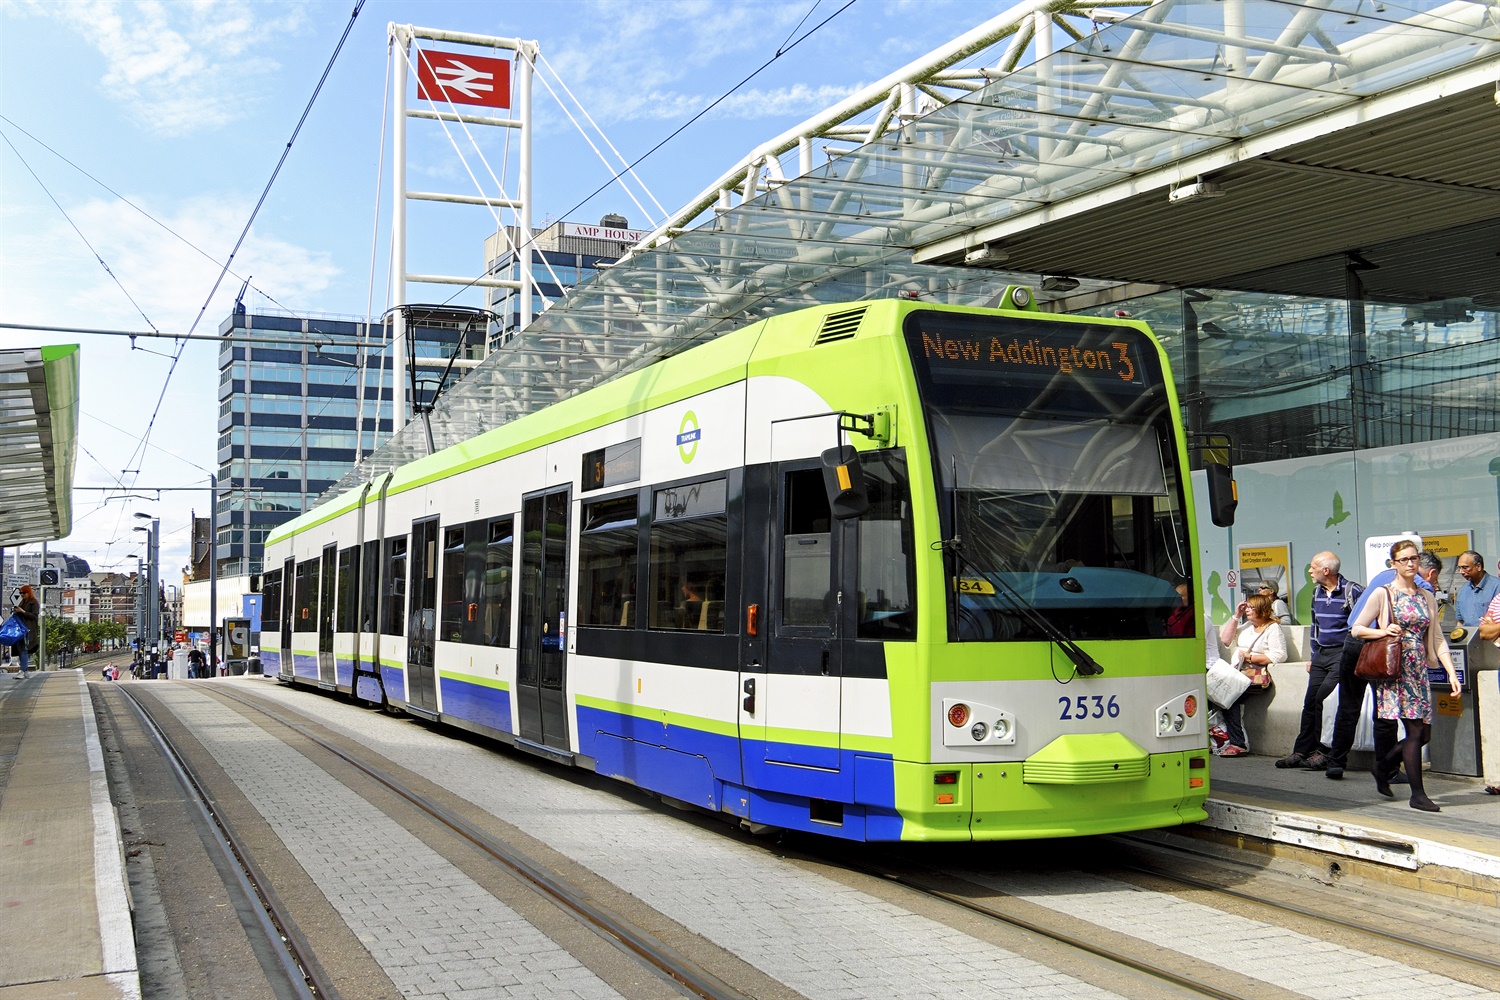 London trams to be fitted with automatic braking system in response to Sandilands recommendations